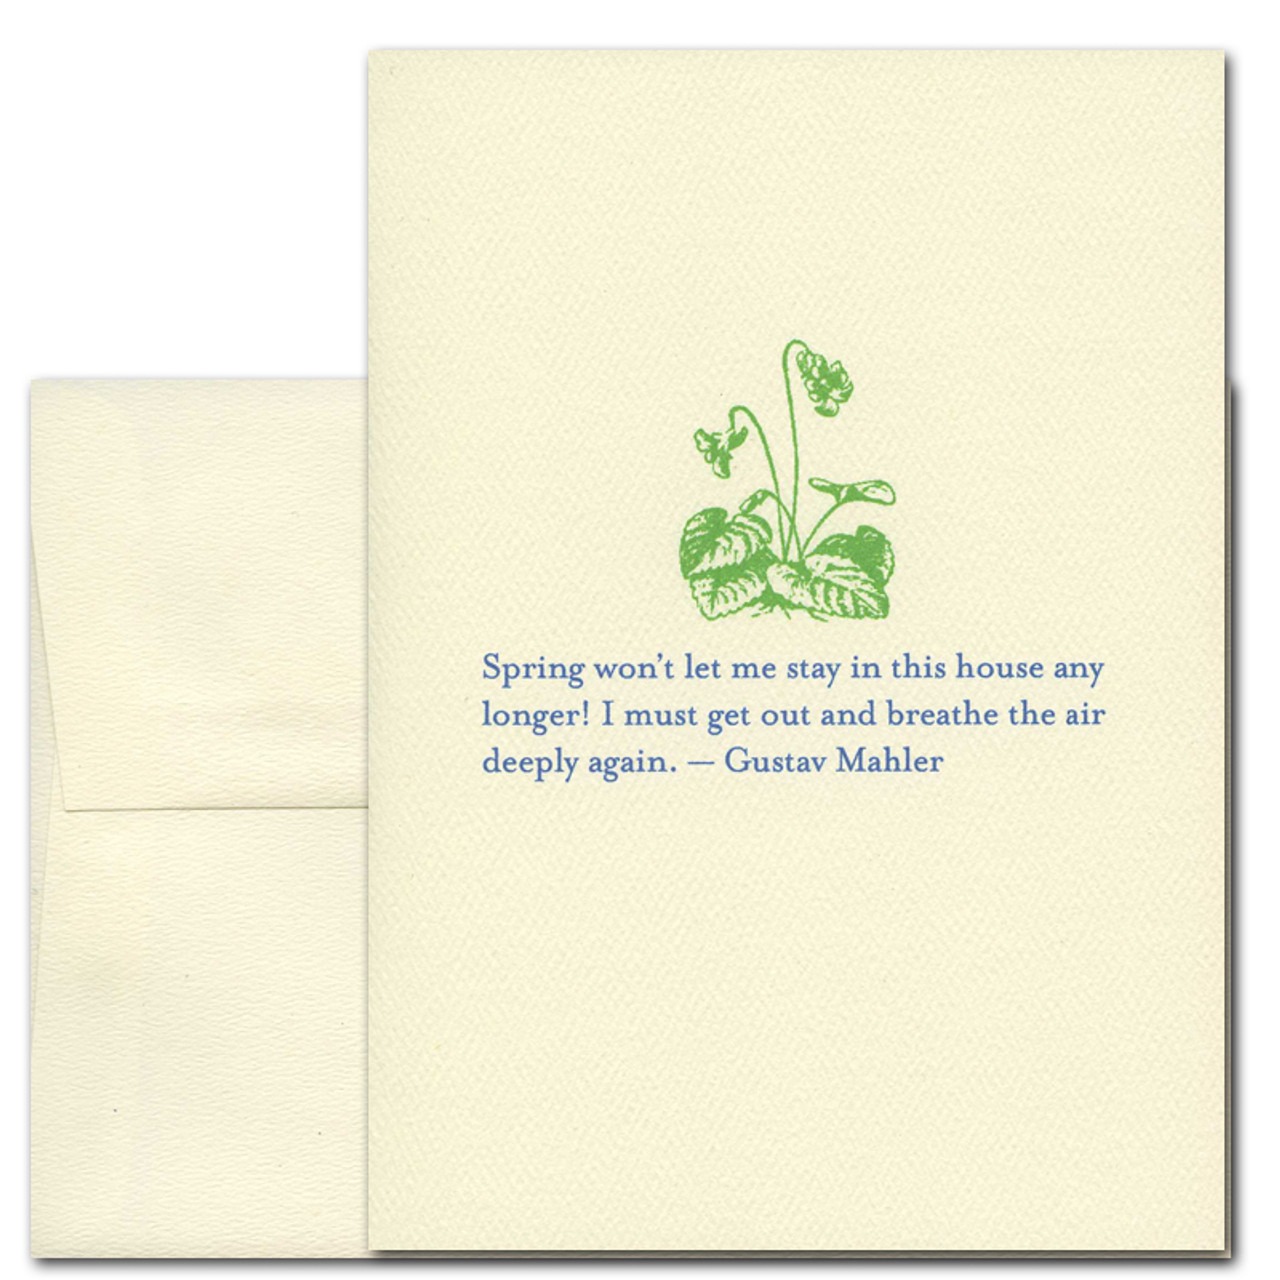 Gustav Mahler Quotation Card on  Spring.  Cover has an illustration of a plant in green that is just starting to grow above the words in blue: Spring won't let me stay in the house any longer! I must go out and breathe the air deeply again.